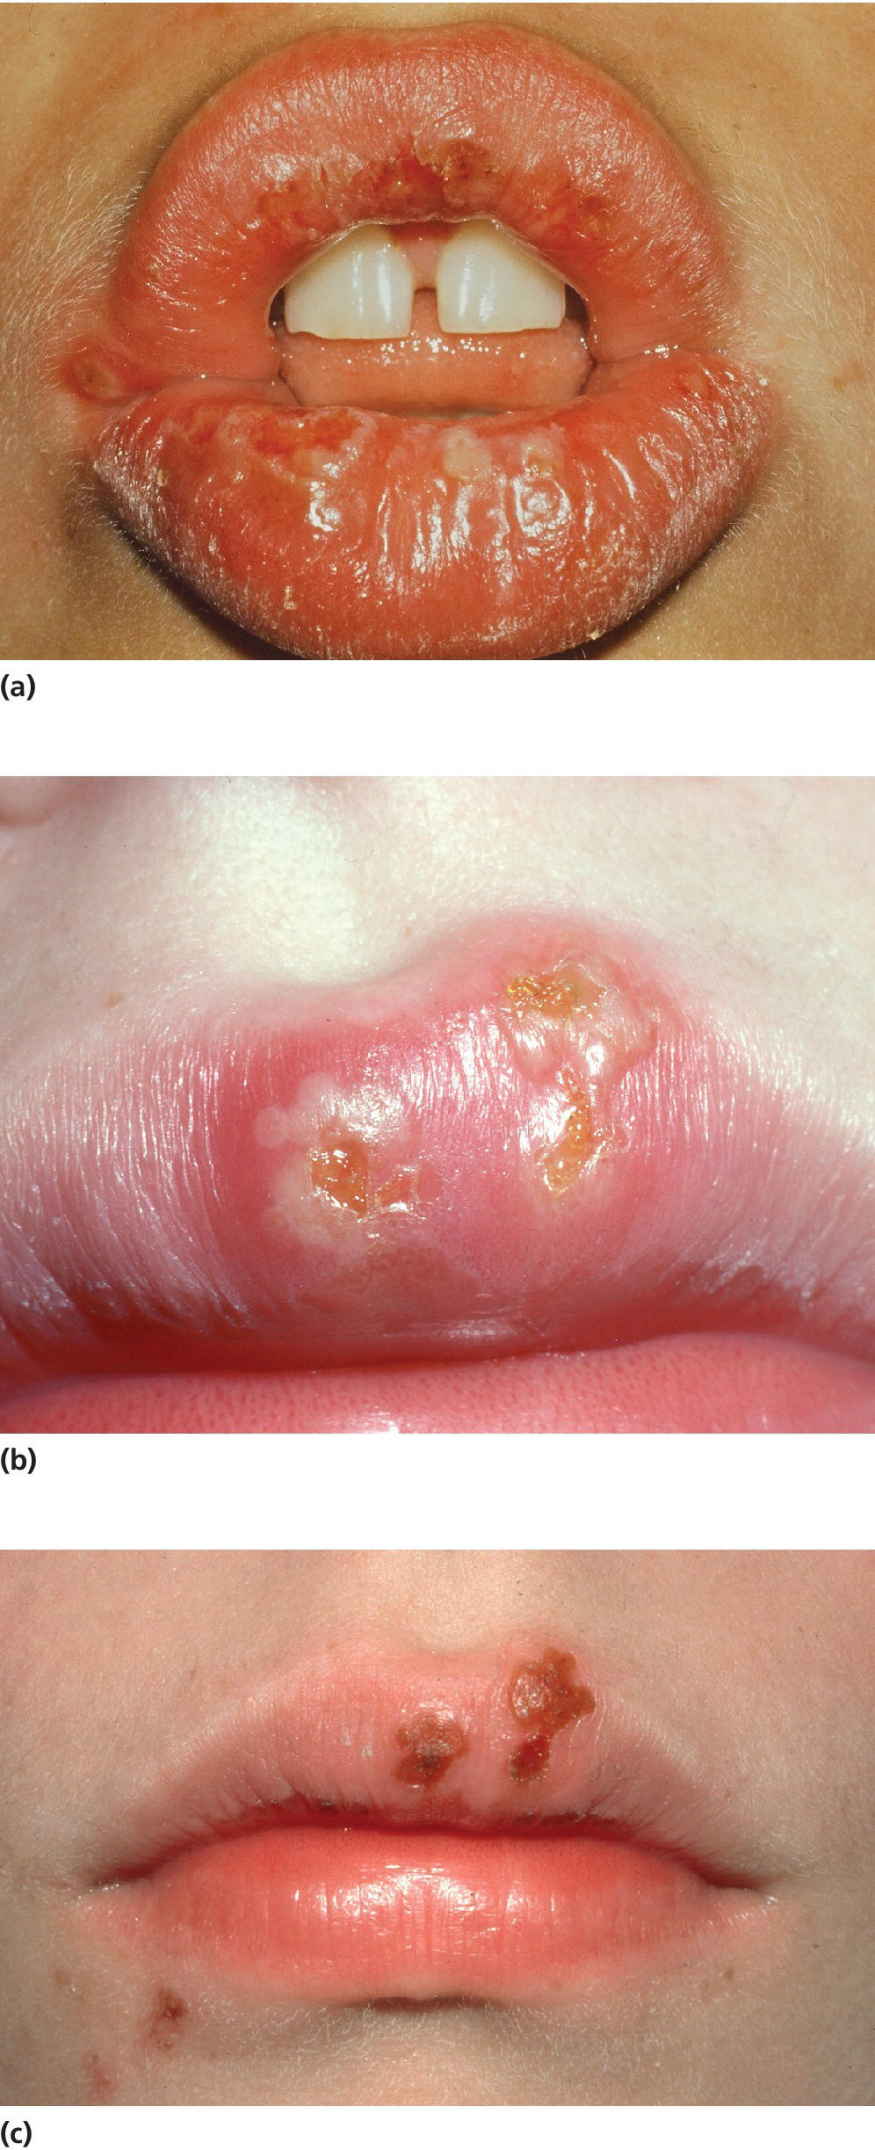 Photo of oral lesions with vesicles and bullae which rapidly burst (top), lesions after 2–3 days (middle), and crust formation/healing 2 days later (bottom).